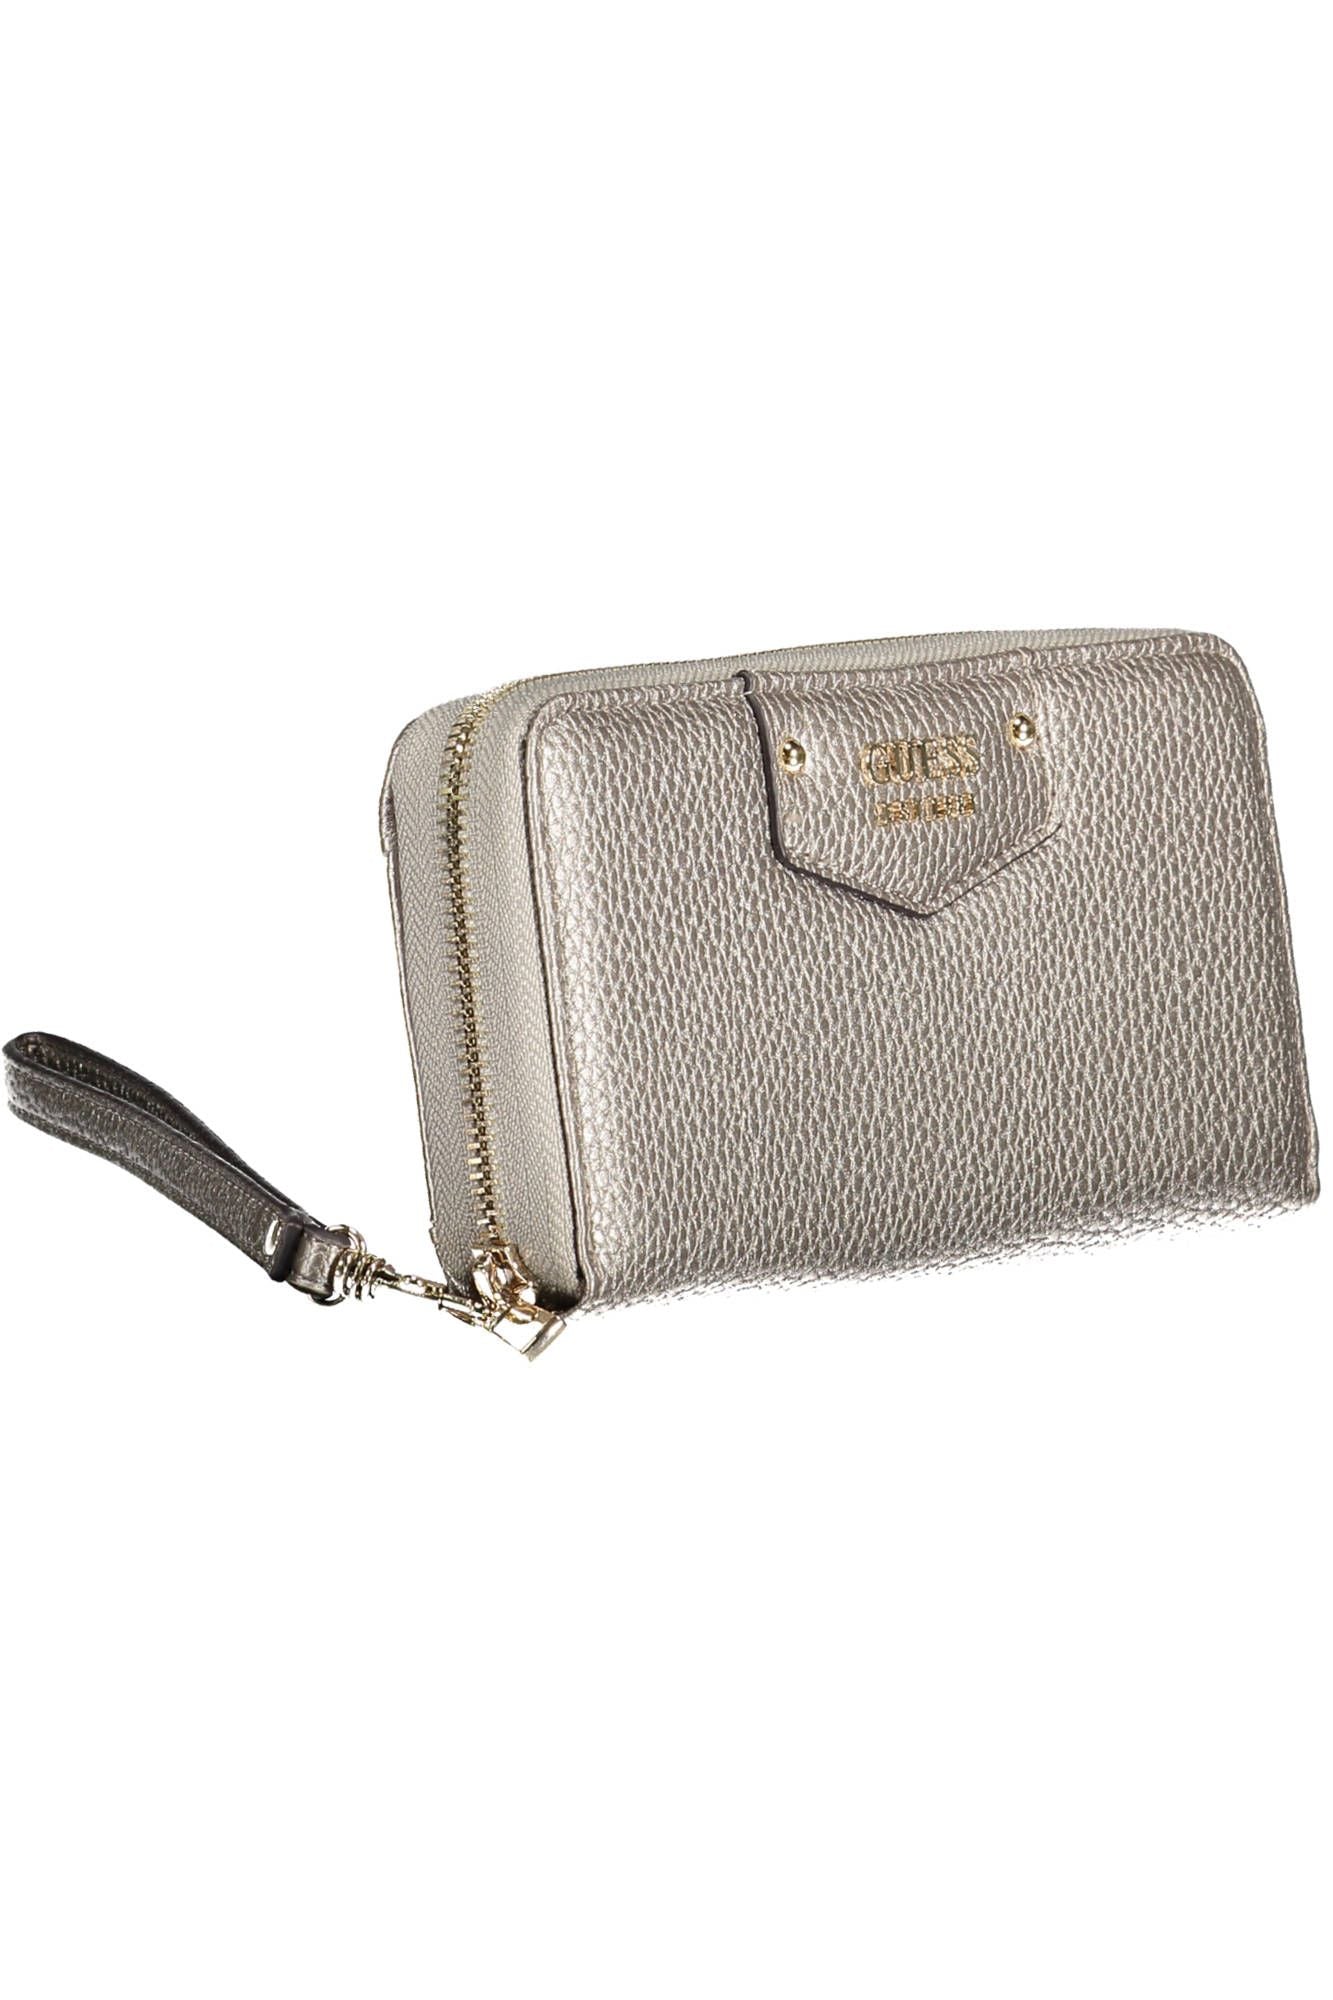 Chic Silver Wallet with Sleek Contrasting Details